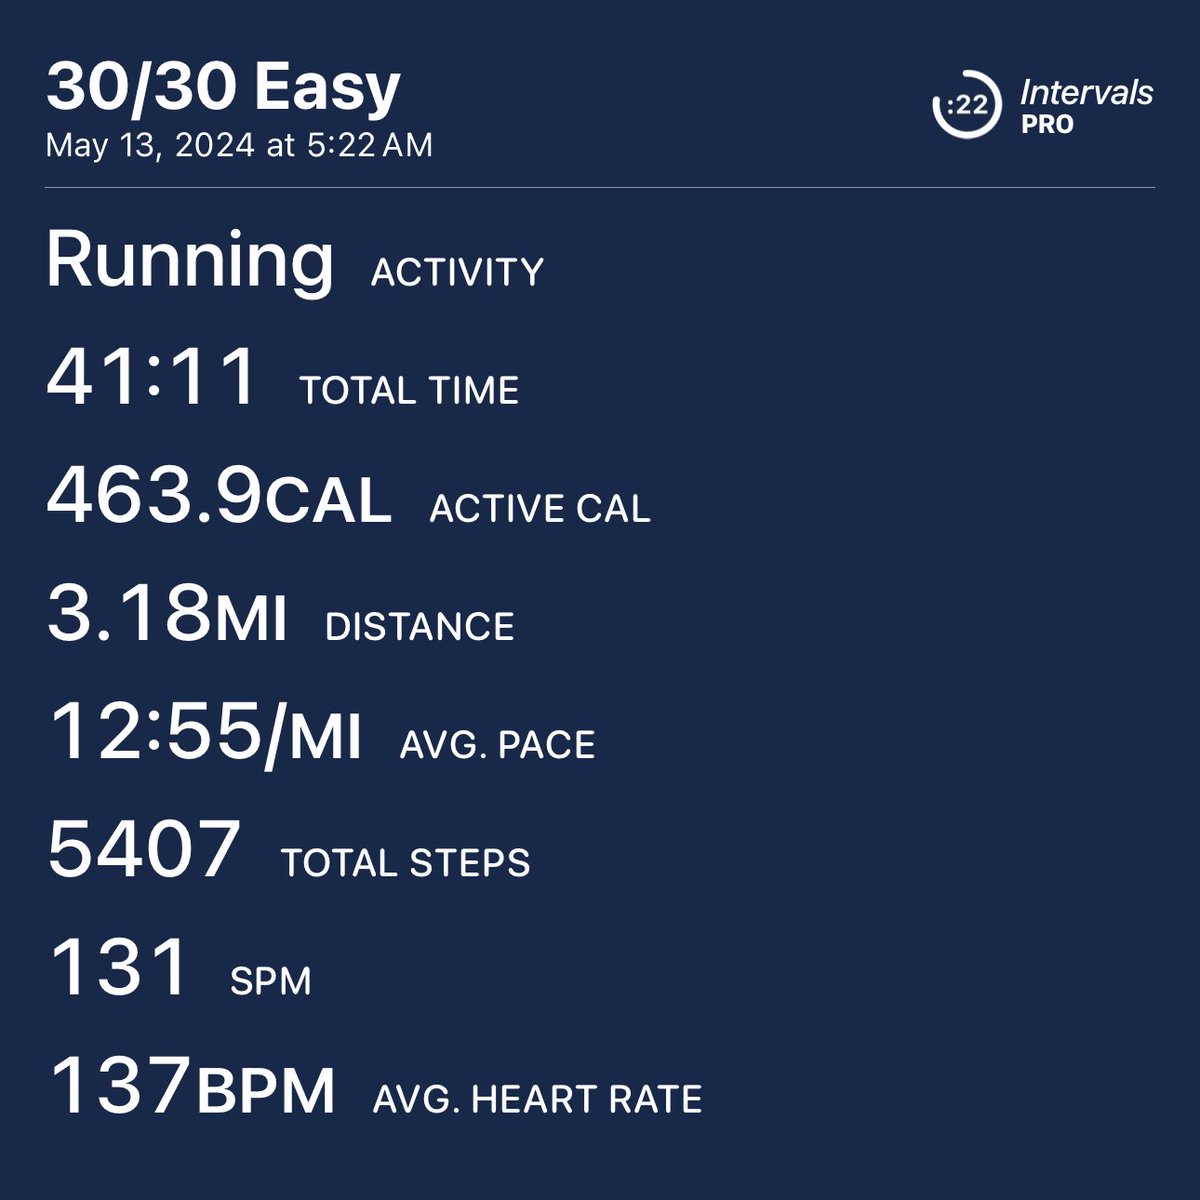 3 miles, 70°, 90% humidity and 7 🐰 

#DFIRfit #BlueTeamFit #WeHackHealth